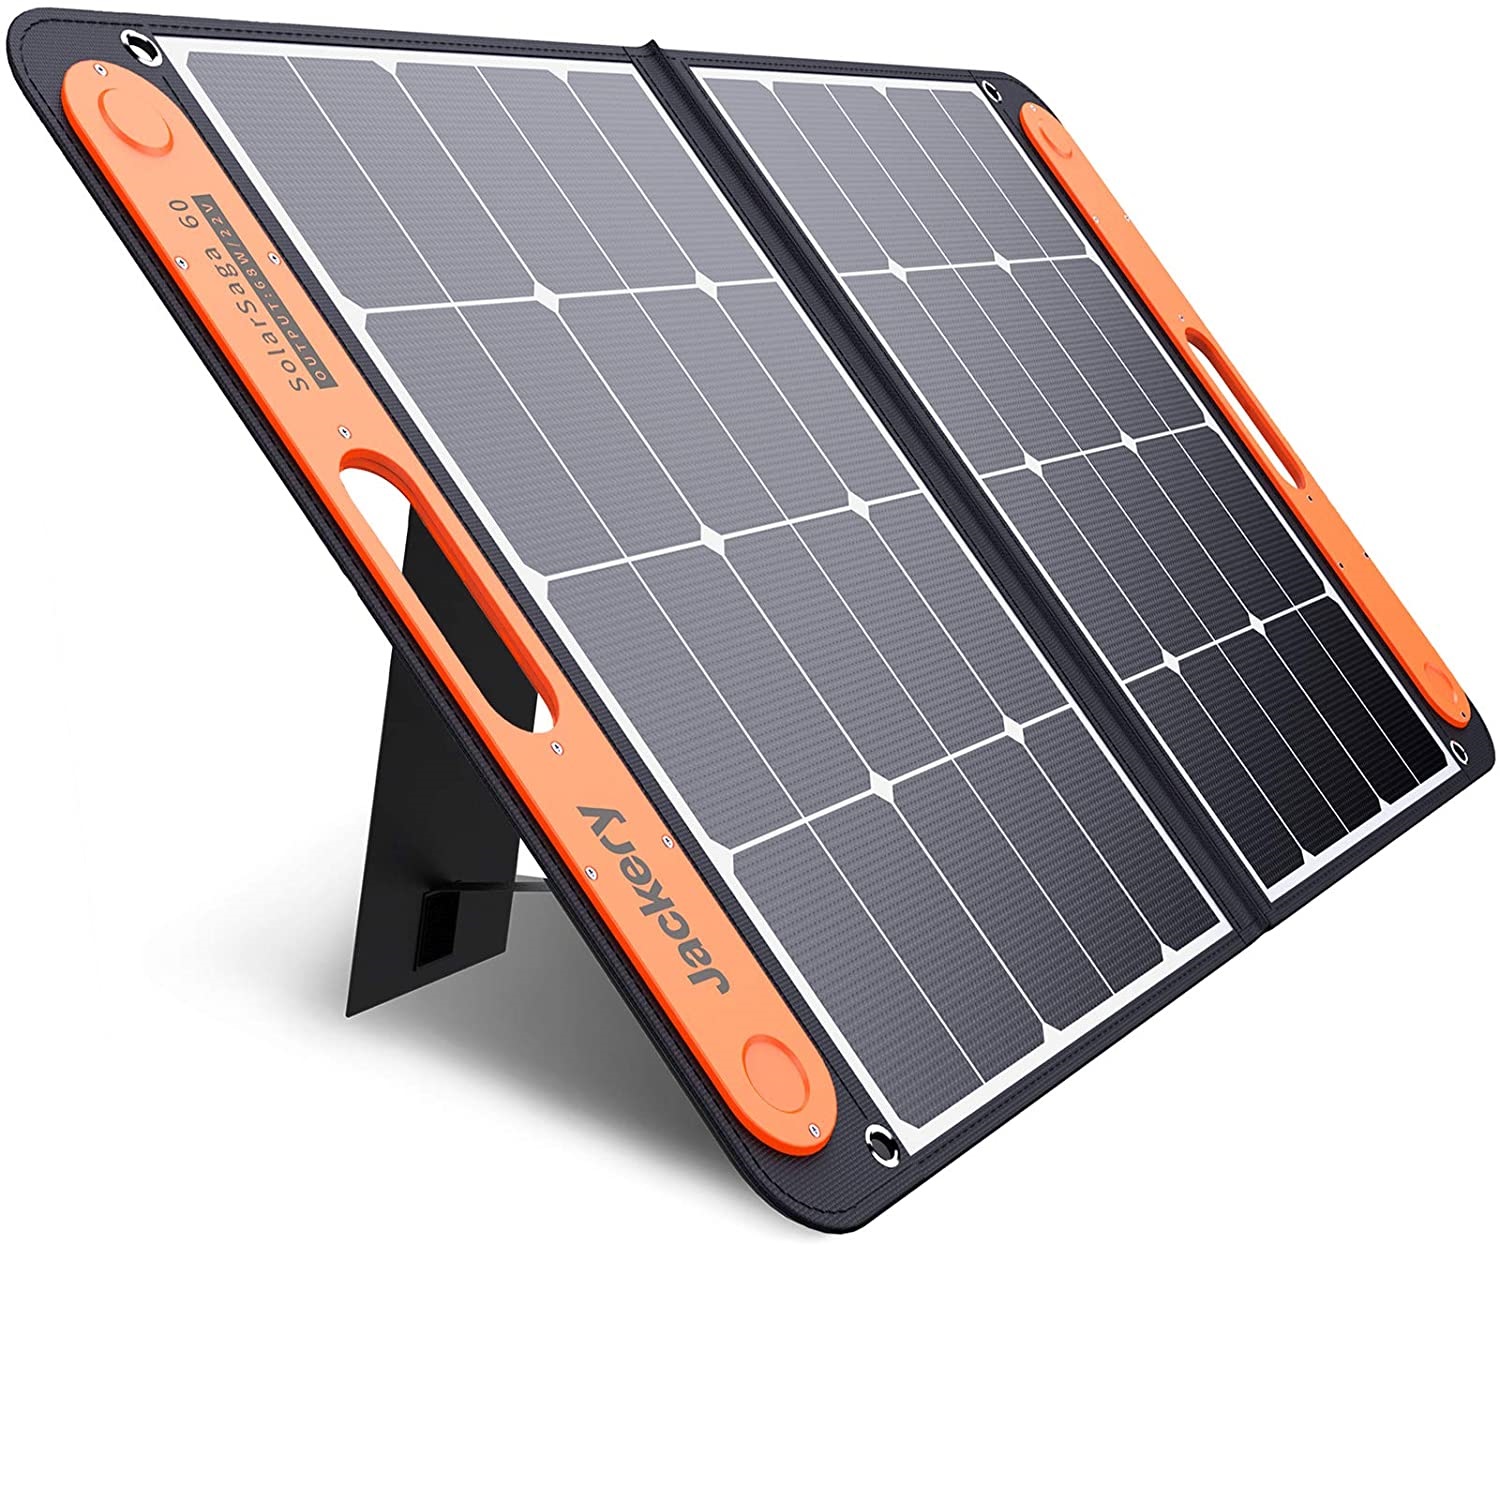 Top 5 Best Portable Solar Panels for RV [2021 Review]